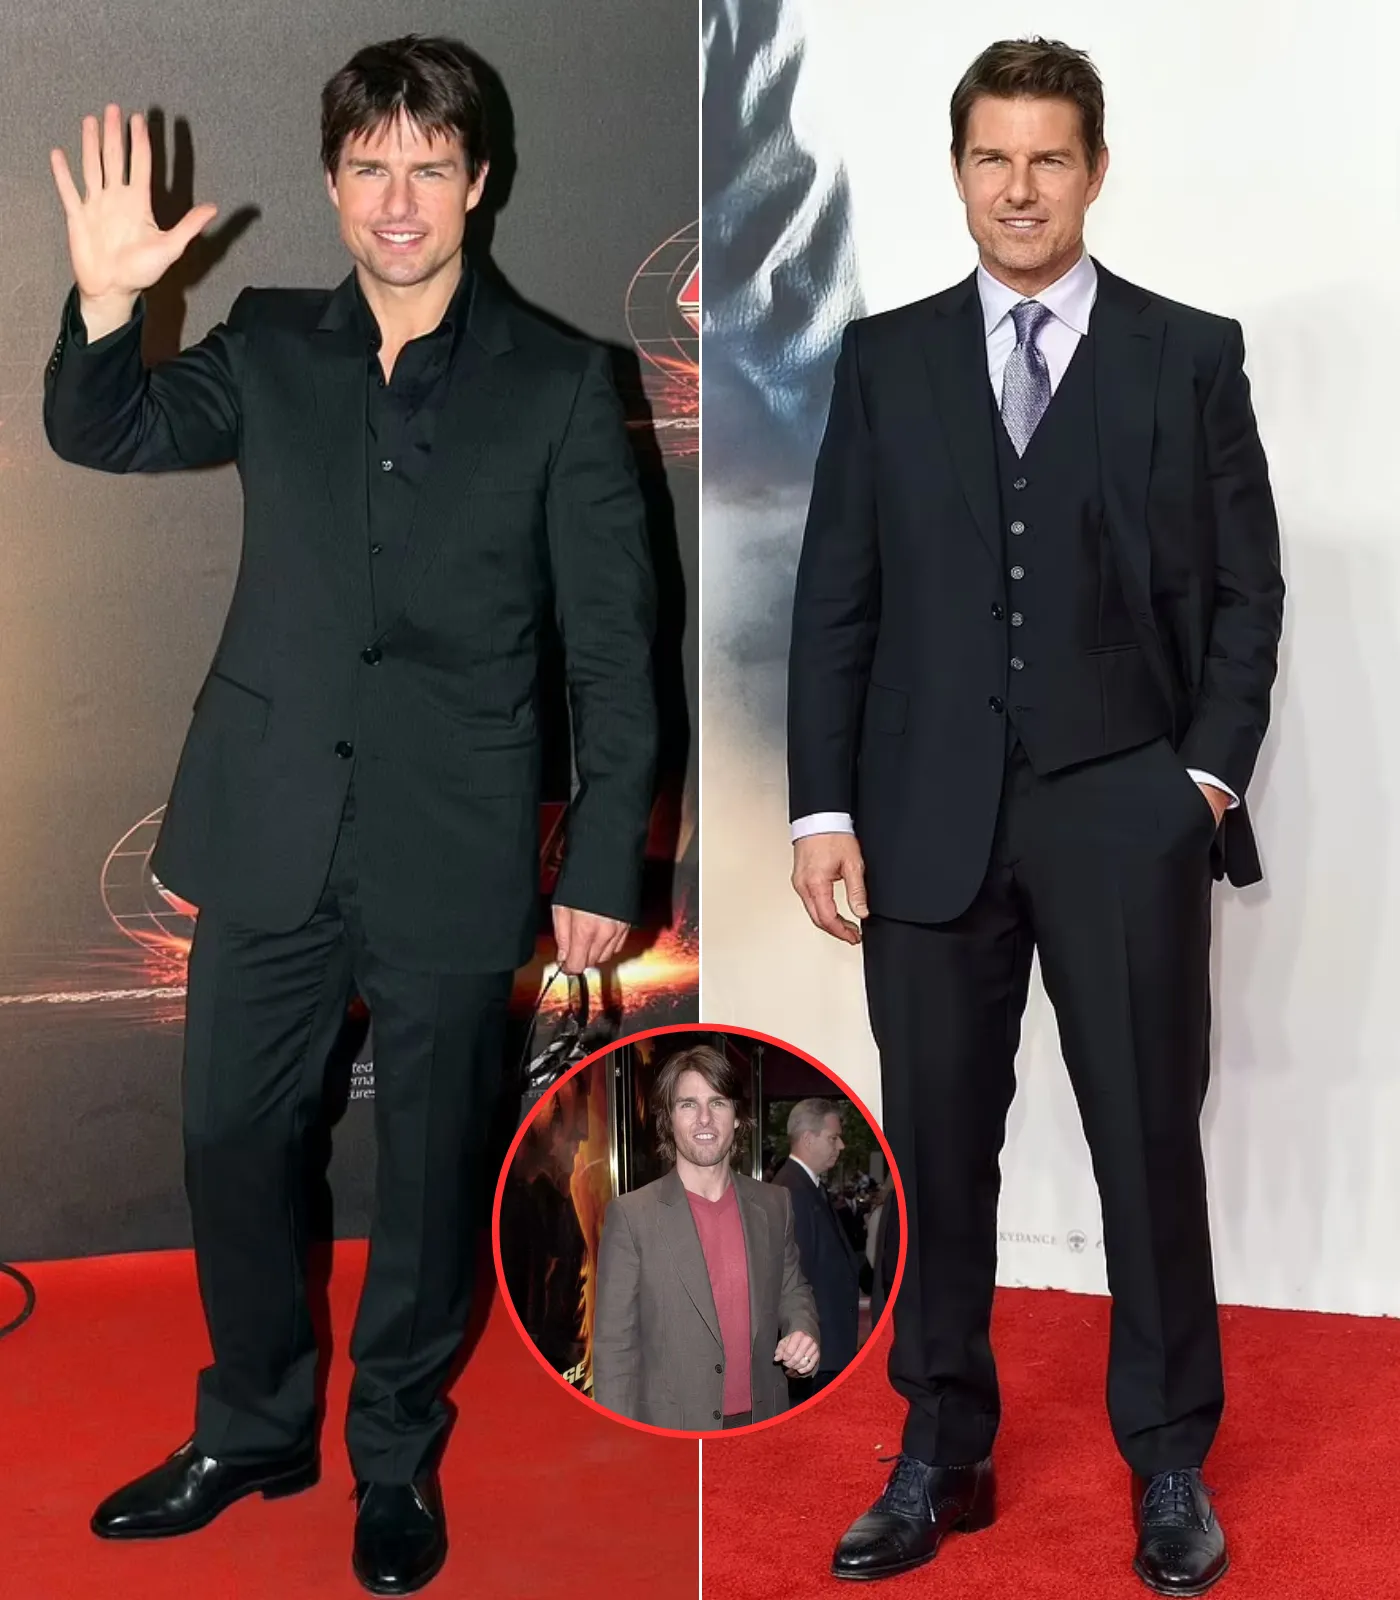 Tom Cruise's changing look through the years: A glance back at the star's leading man evolution at his Mission: Impossible premieres